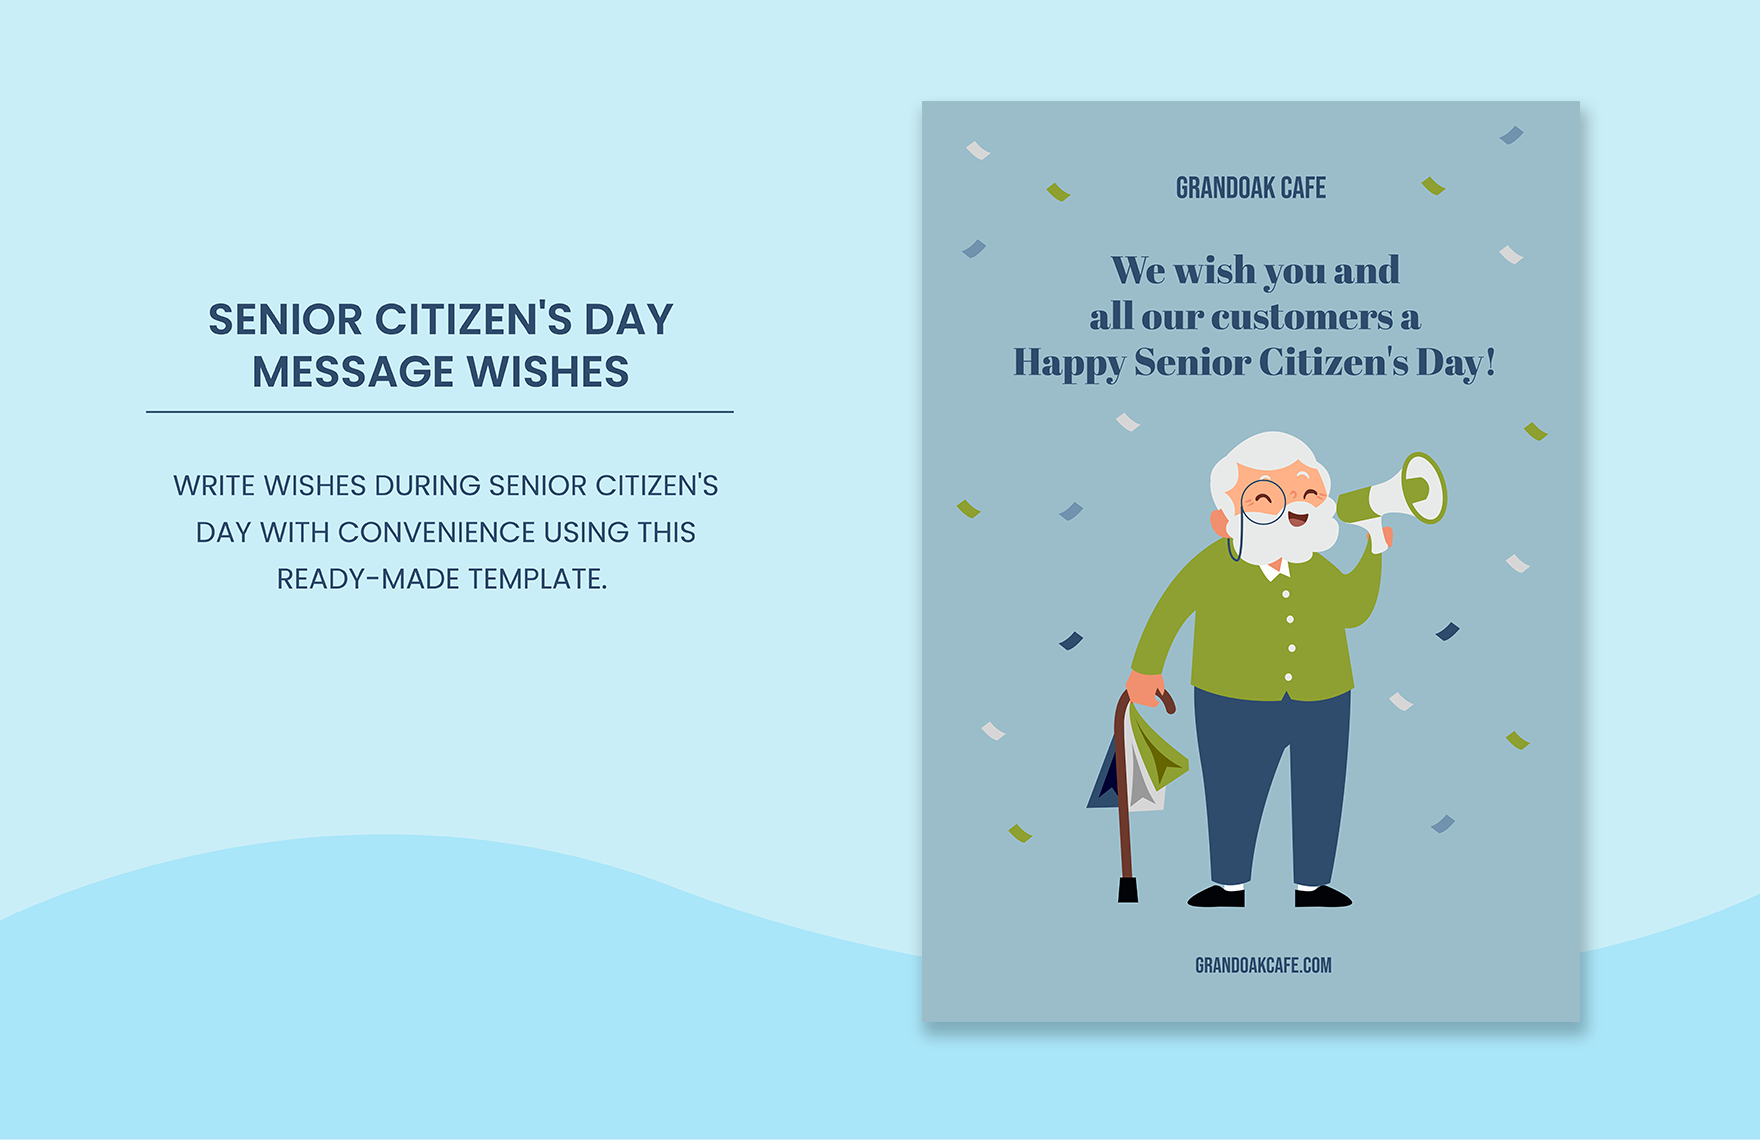 Senior Citizen's Day Message Wishes Template